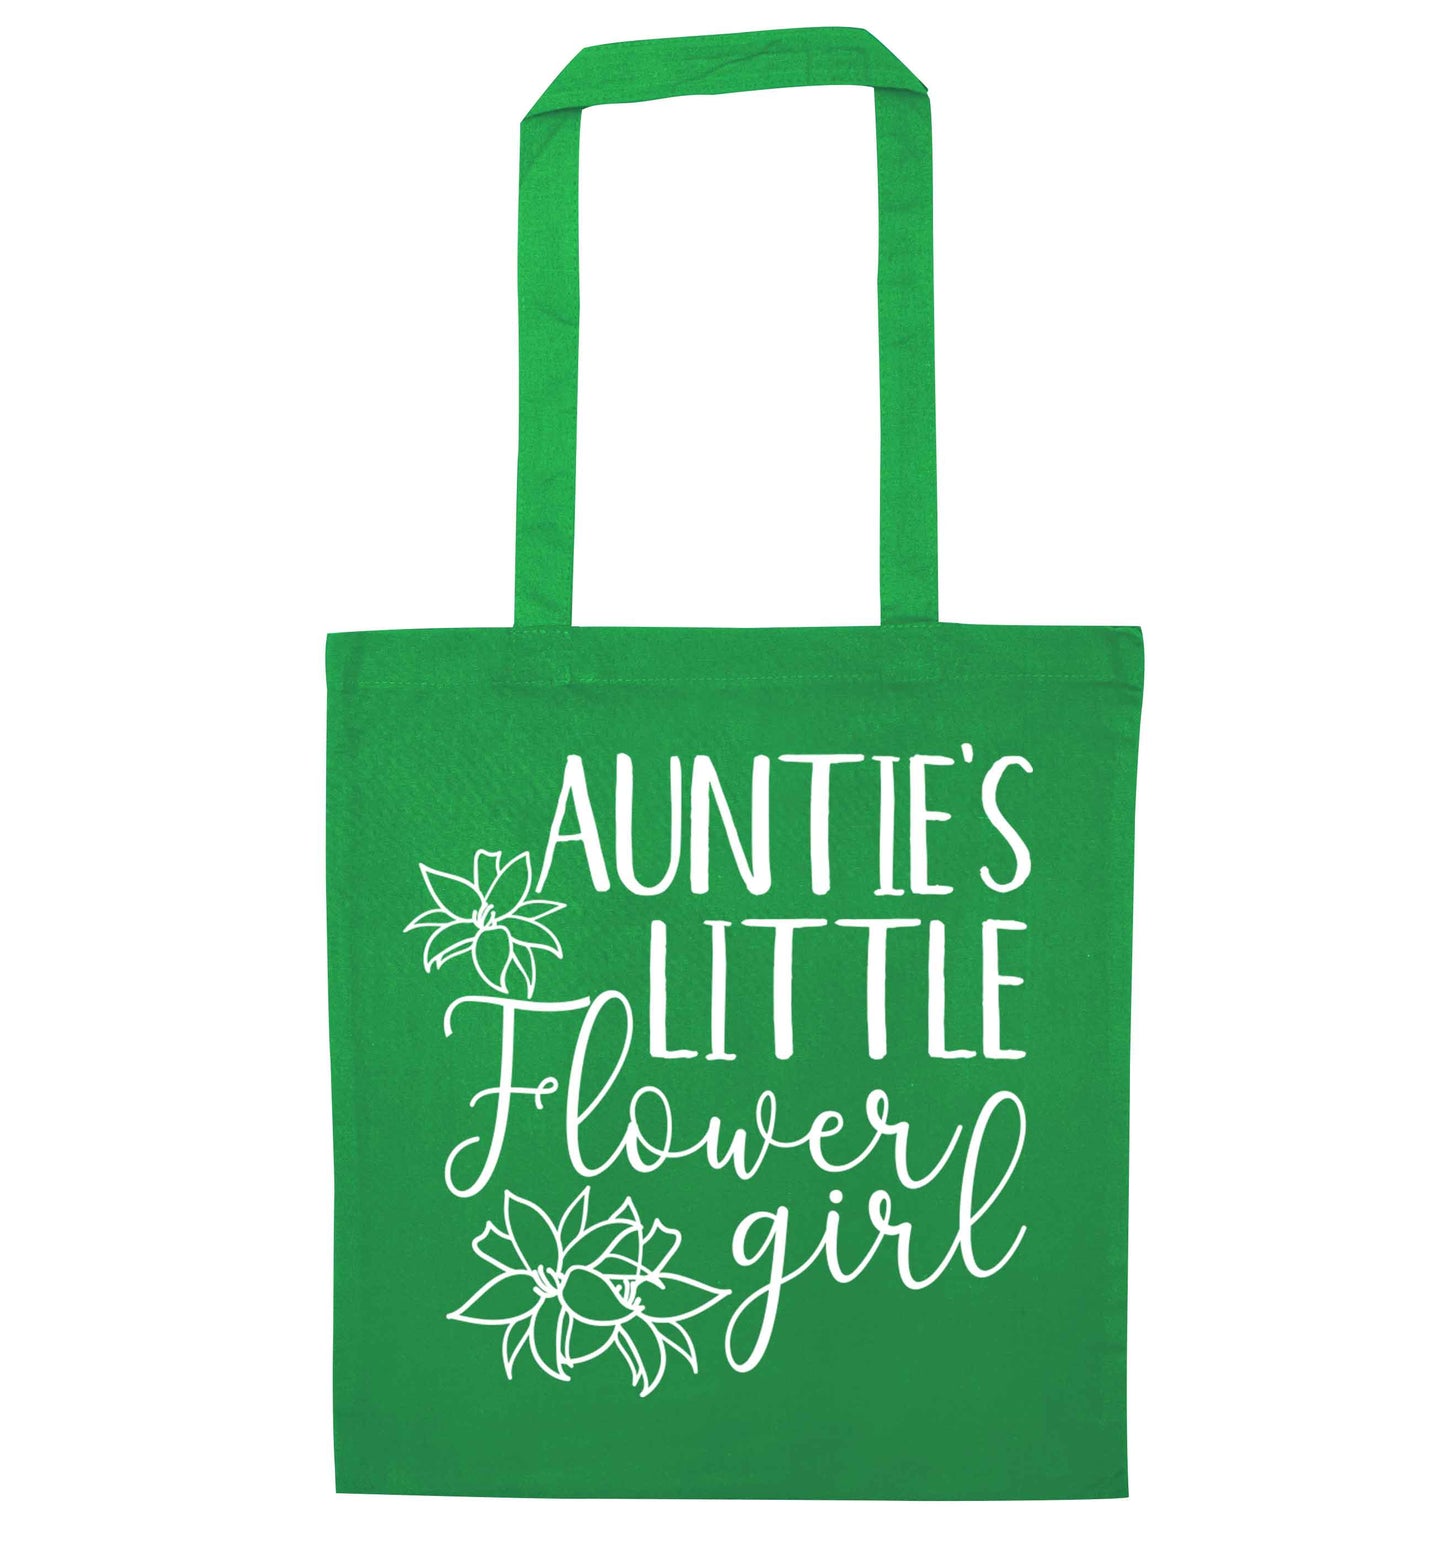 Perfect wedding guest favours or hen party gifts! Personalised bridal floral wreath designs, any name, any role! green tote bag